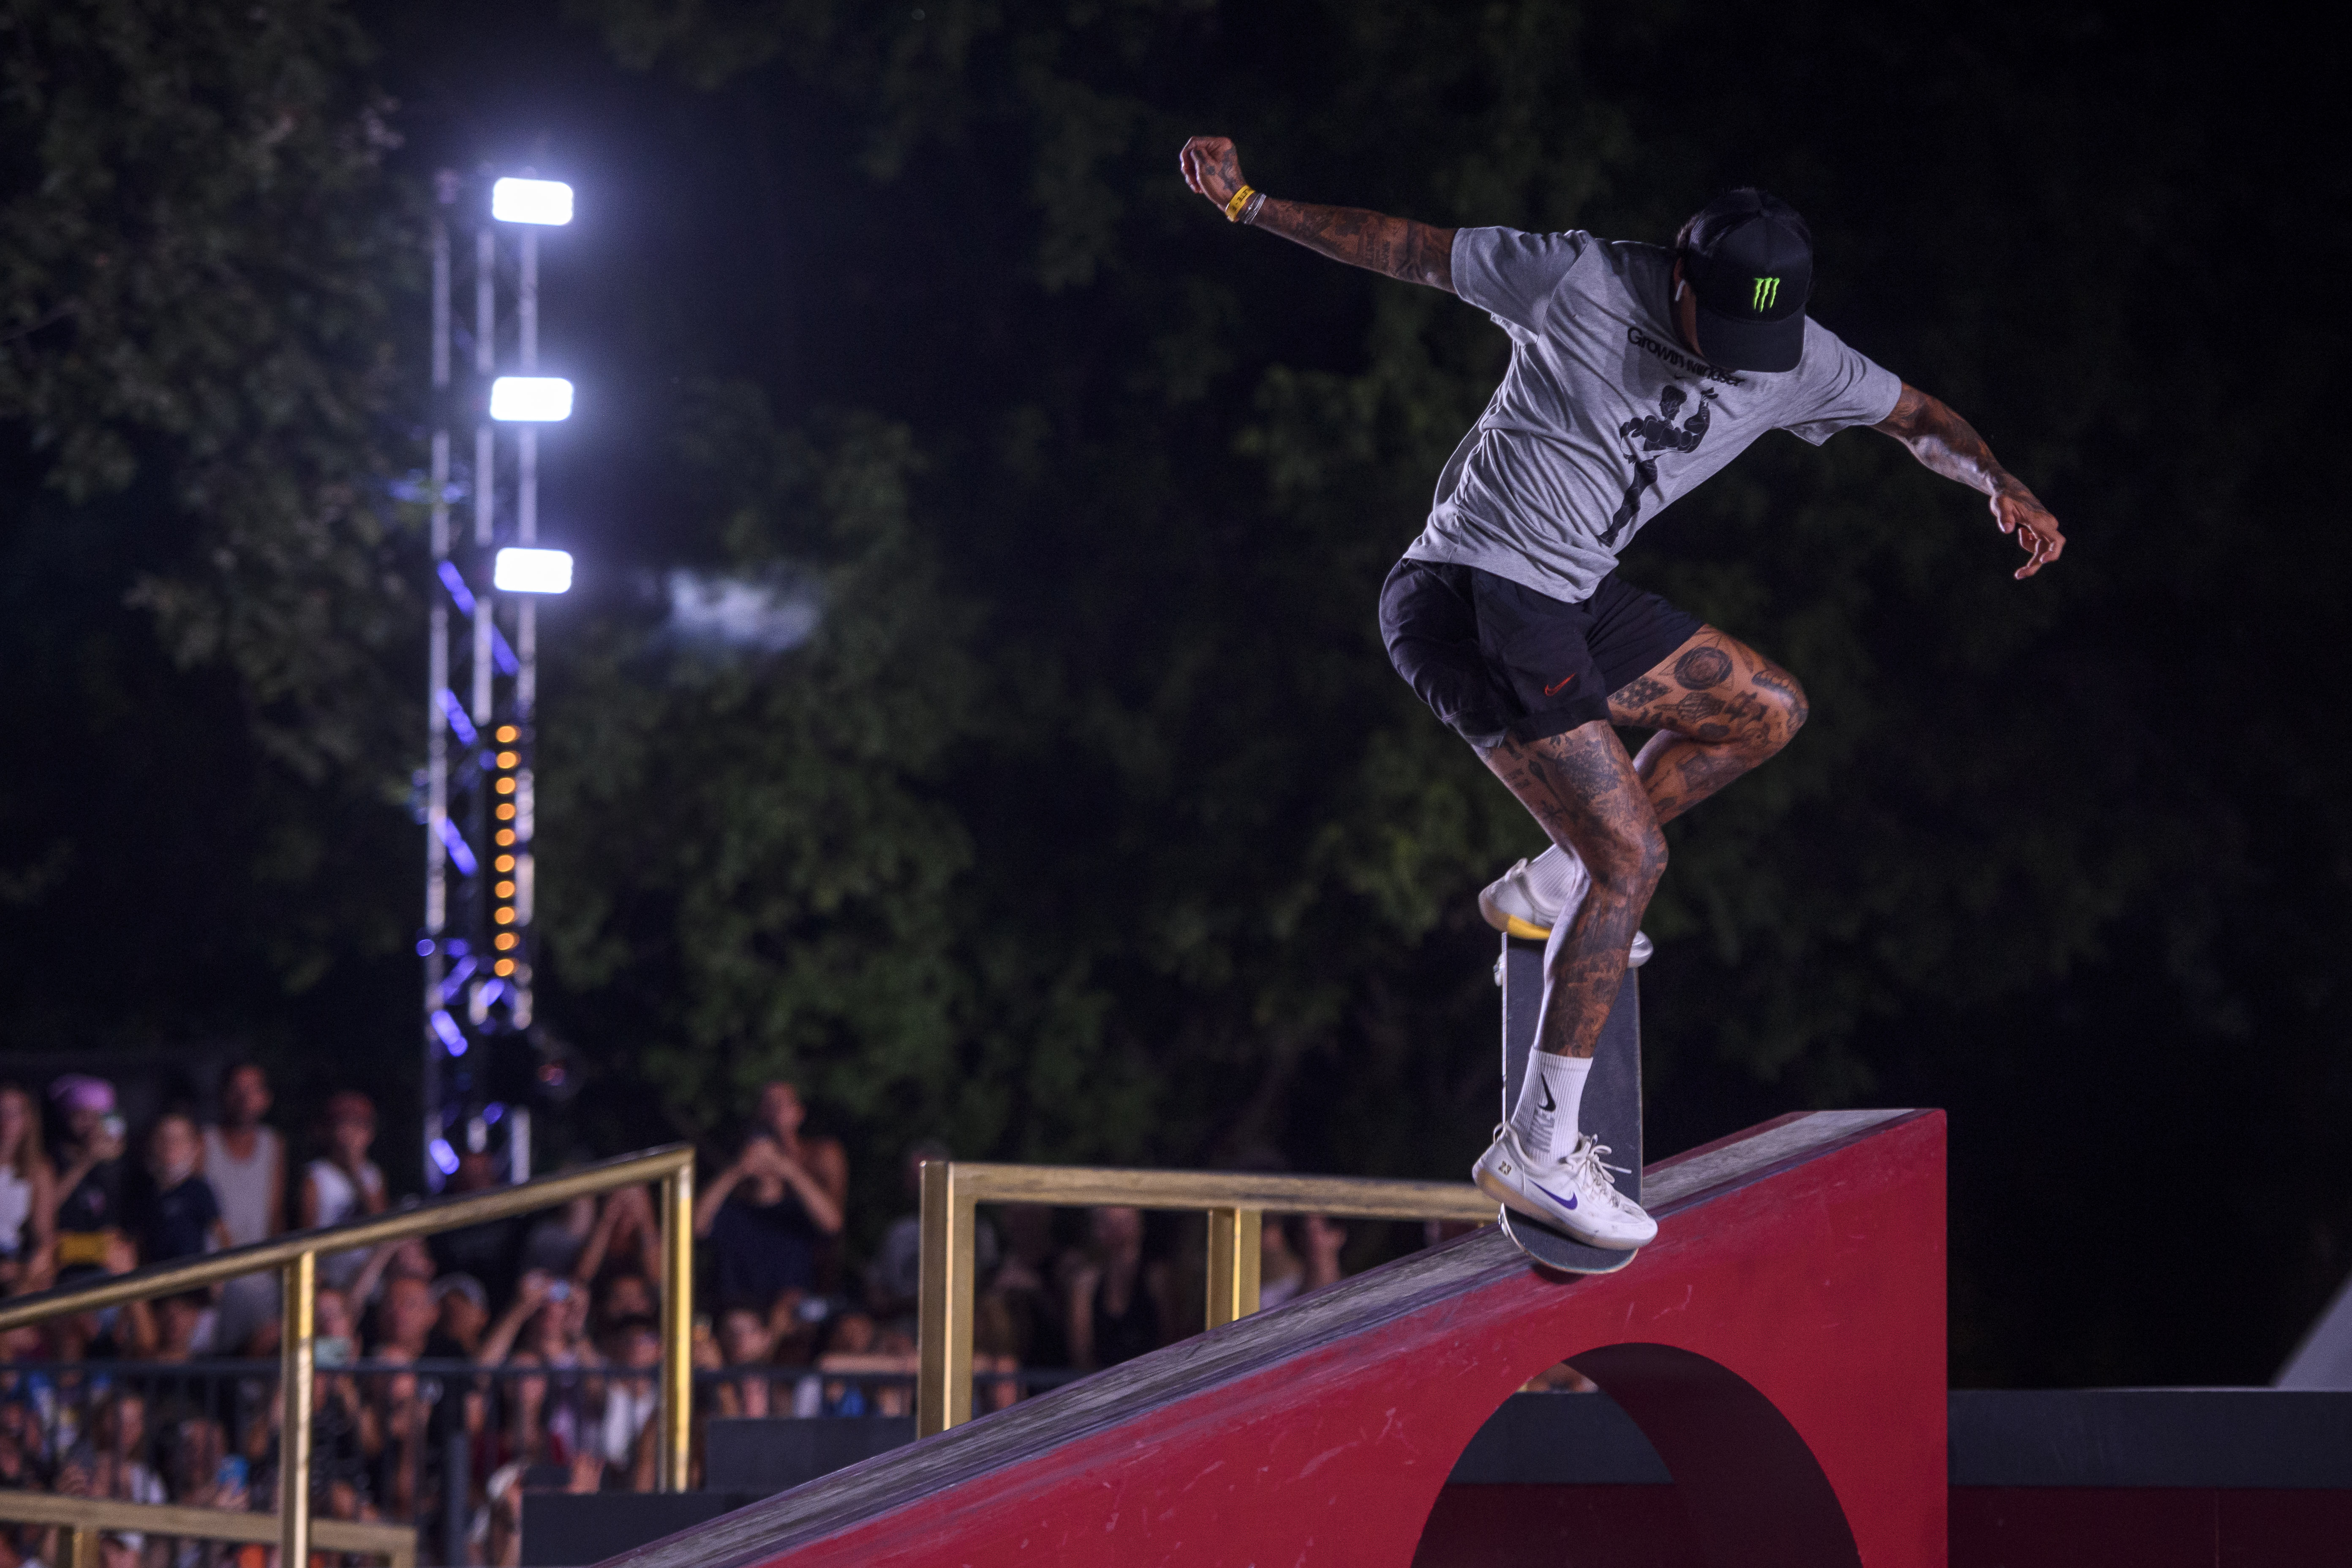 ROME, ITALY - JULY 03: Nyjah Huston of the USA in action during the men's Final of the World Street Skateboarding Rome 2022 at Colle Oppio park, on July 3, 2022 in Rome, Italy. (Photo by Antonio Masiello/Getty Images)